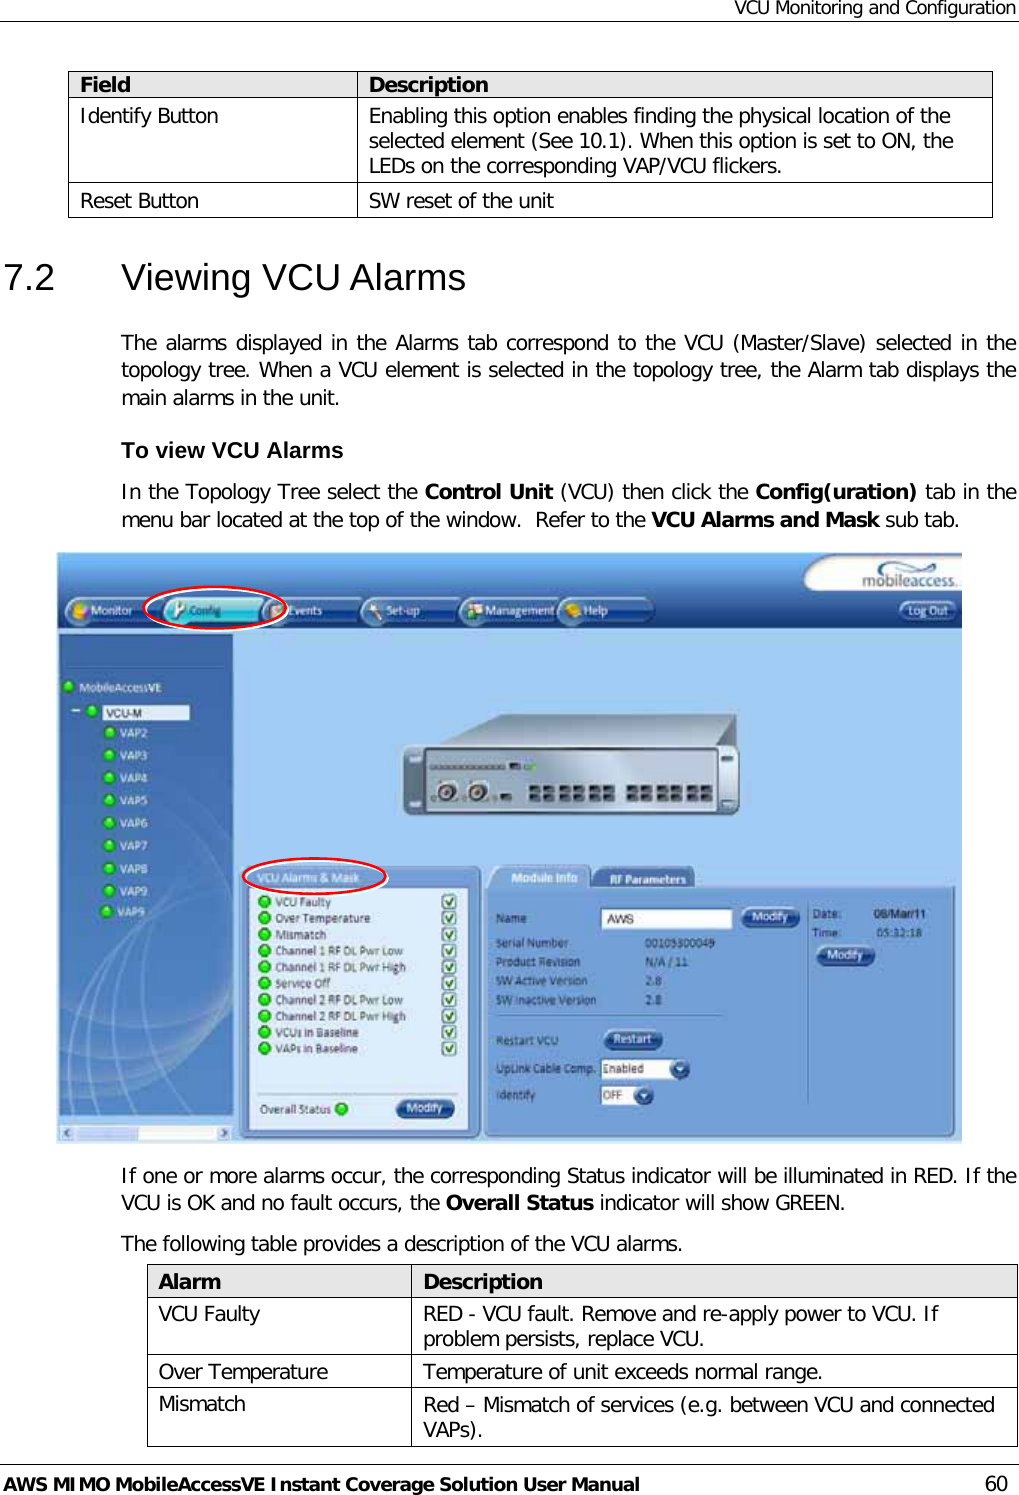 VCU Monitoring and Configuration AWS MIMO MobileAccessVE Instant Coverage Solution User Manual  60 Field Description Identify Button Enabling this option enables finding the physical location of the selected element (See  10.1). When this option is set to ON, the LEDs on the corresponding VAP/VCU flickers. Reset Button SW reset of the unit 7.2  Viewing VCU Alarms The alarms displayed in the Alarms tab correspond to the VCU (Master/Slave) selected in the topology tree. When a VCU element is selected in the topology tree, the Alarm tab displays the main alarms in the unit. To view VCU Alarms  In the Topology Tree select the Control Unit (VCU) then click the Config(uration) tab in the menu bar located at the top of the window.  Refer to the VCU Alarms and Mask sub tab.  If one or more alarms occur, the corresponding Status indicator will be illuminated in RED. If the VCU is OK and no fault occurs, the Overall Status indicator will show GREEN. The following table provides a description of the VCU alarms. Alarm Description VCU Faulty RED - VCU fault. Remove and re-apply power to VCU. If problem persists, replace VCU. Over Temperature Temperature of unit exceeds normal range. Mismatch Red – Mismatch of services (e.g. between VCU and connected VAPs). 